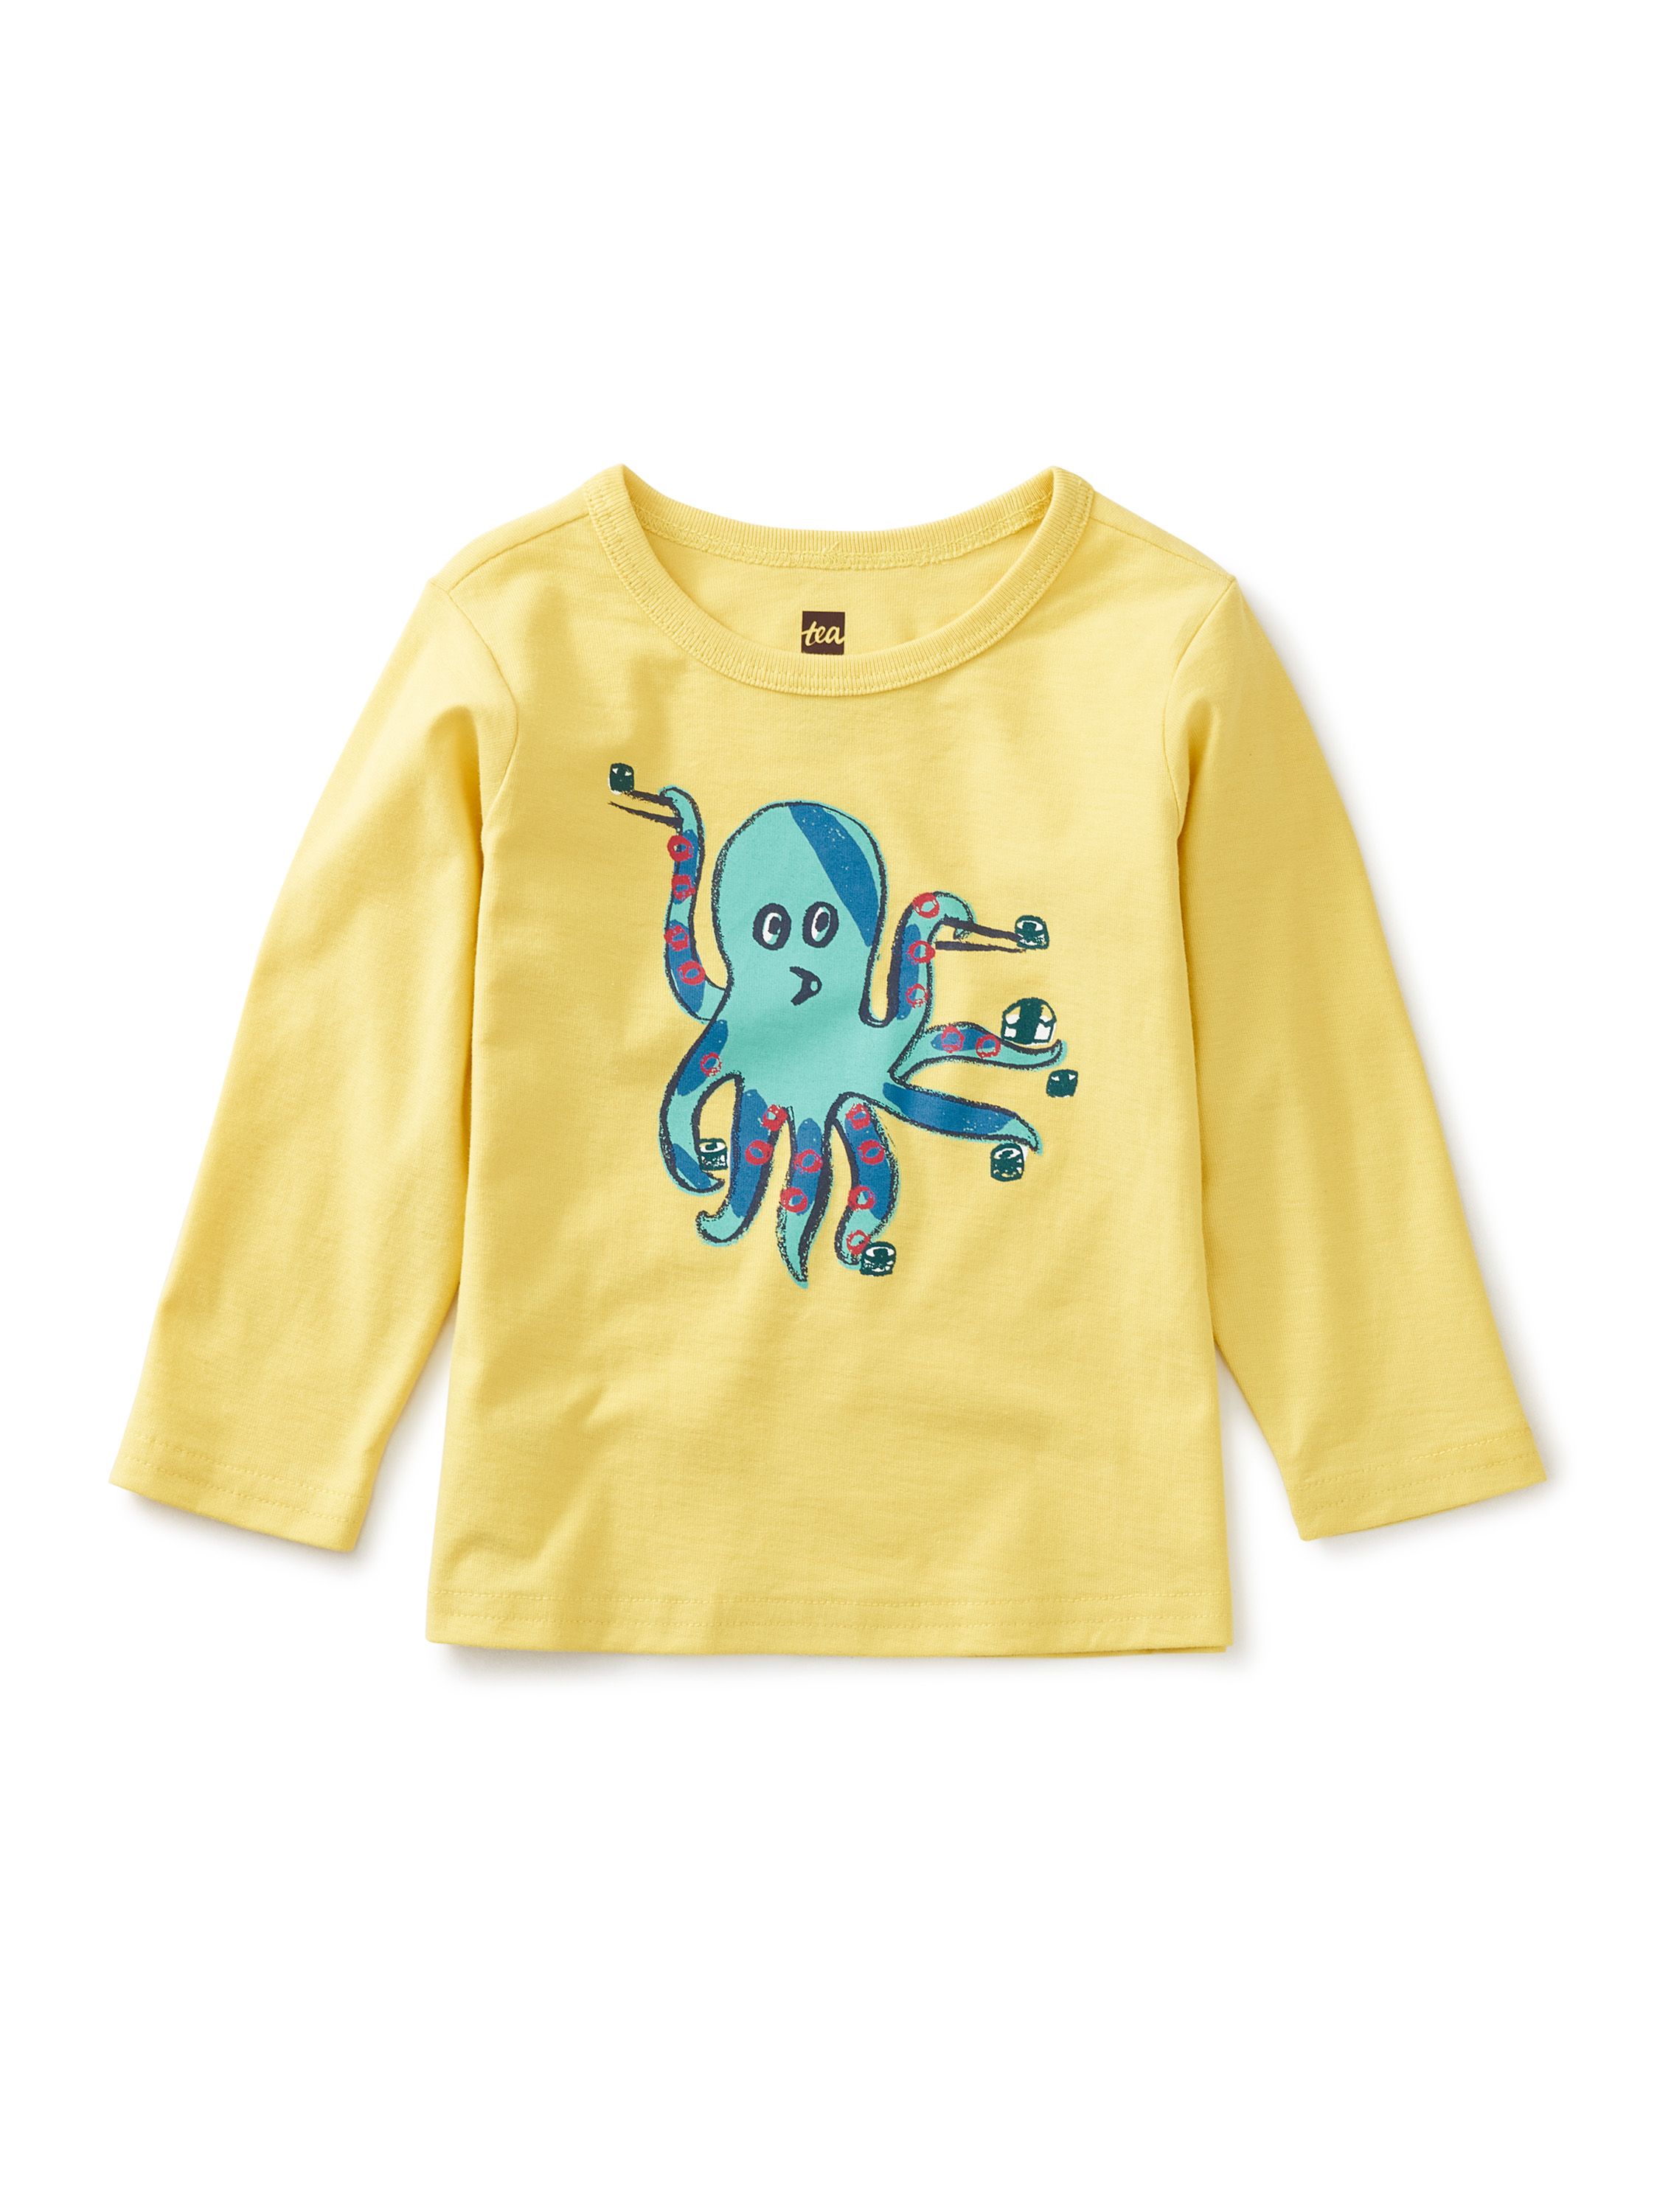 Octo Sushi Baby Graphic Tee | Tea Collection